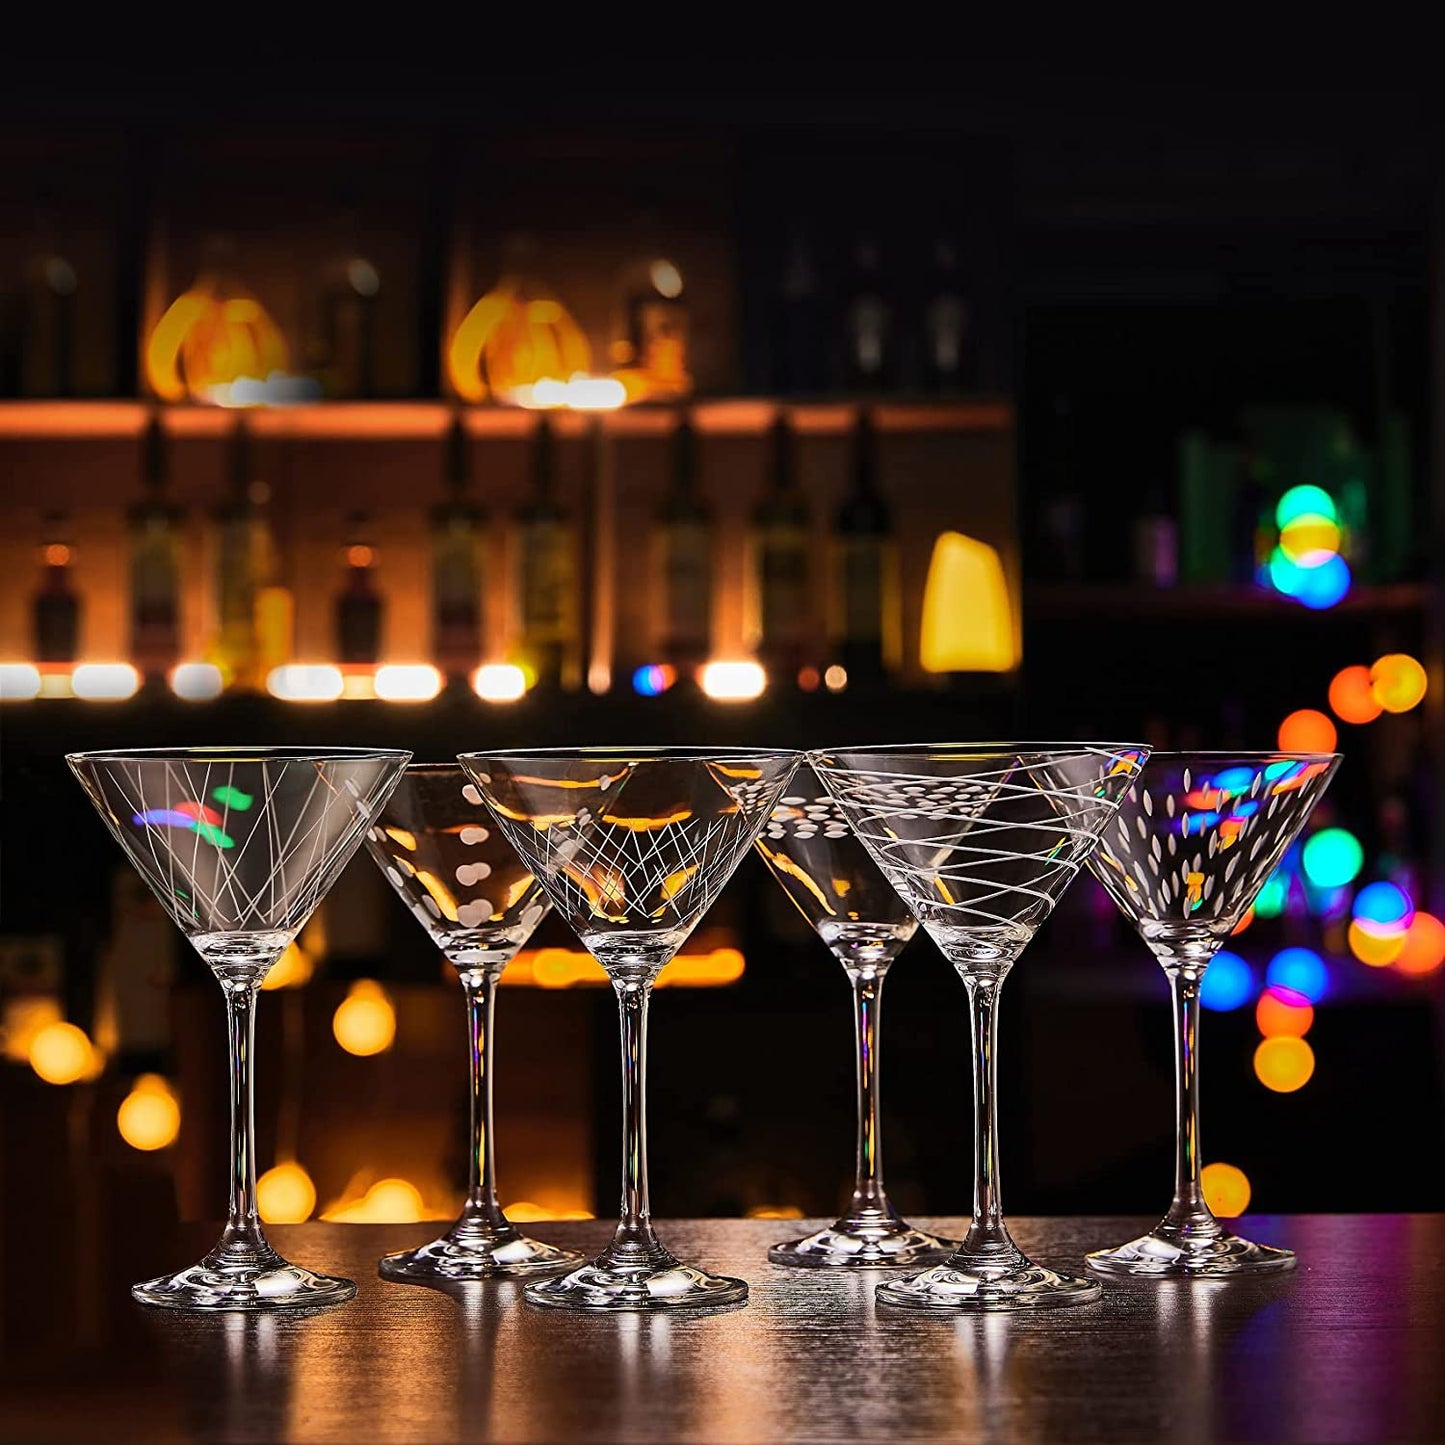 Crystal Martini Glasses Set of 6, SOGLIT Hand Crafted Etched Martini Glasses with Stem, Manhatann Glasses for Cocktail, Cosmopolitan Glasses, 9oz Etched Cocktail Glasses Gift for Men, Crystal Clear